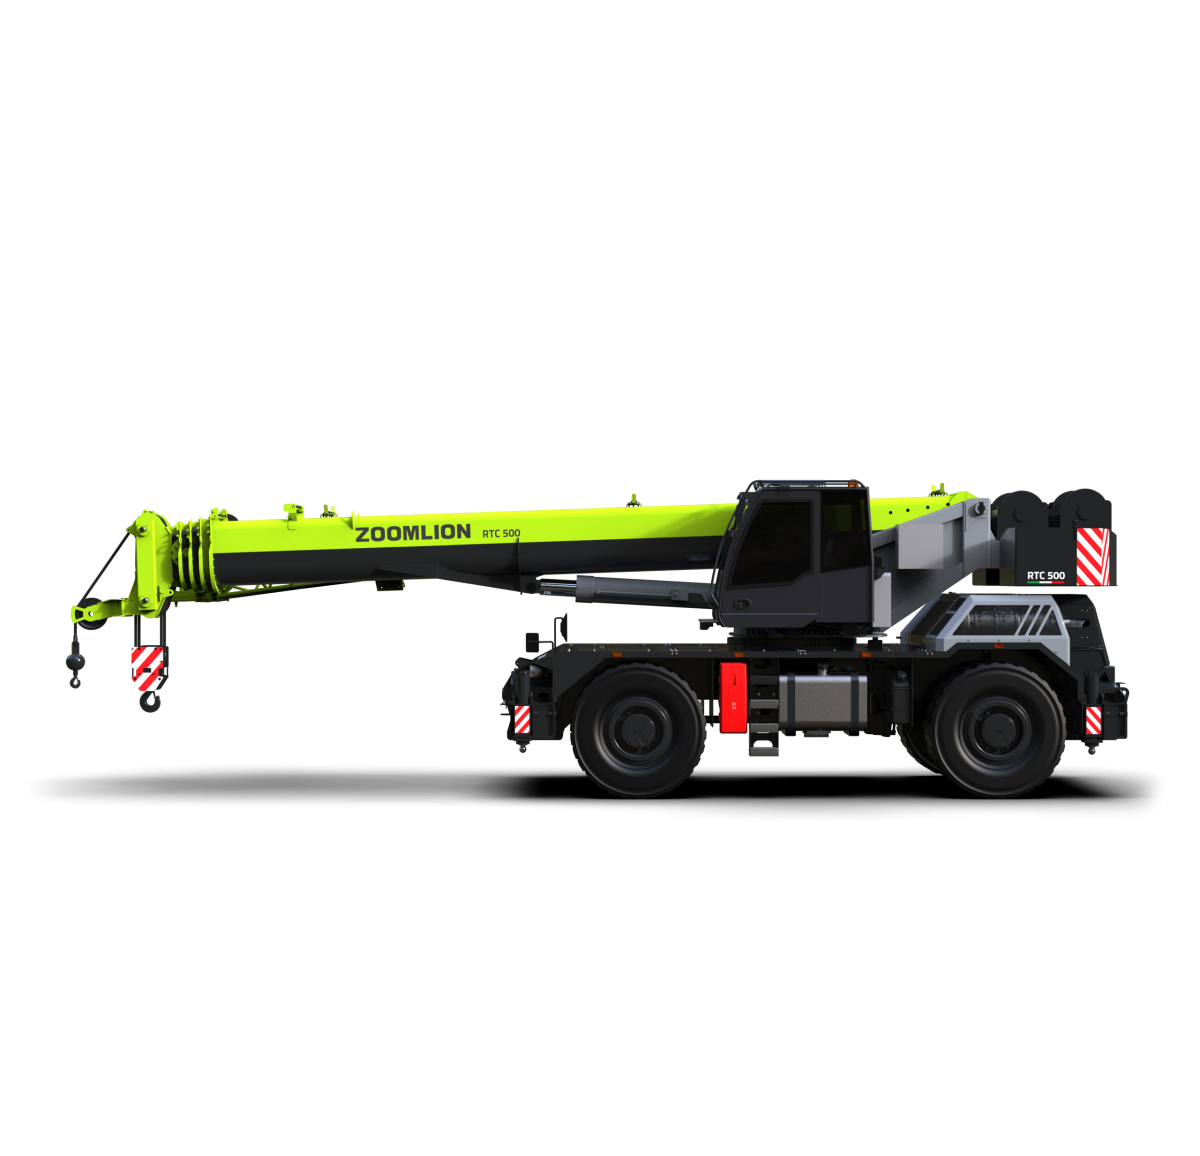 /storage/2023/05/zoomlion-exhibited-the-rtc-500-rough-terrain-crane-at-samoter-2023_645f4e8641a1d.png